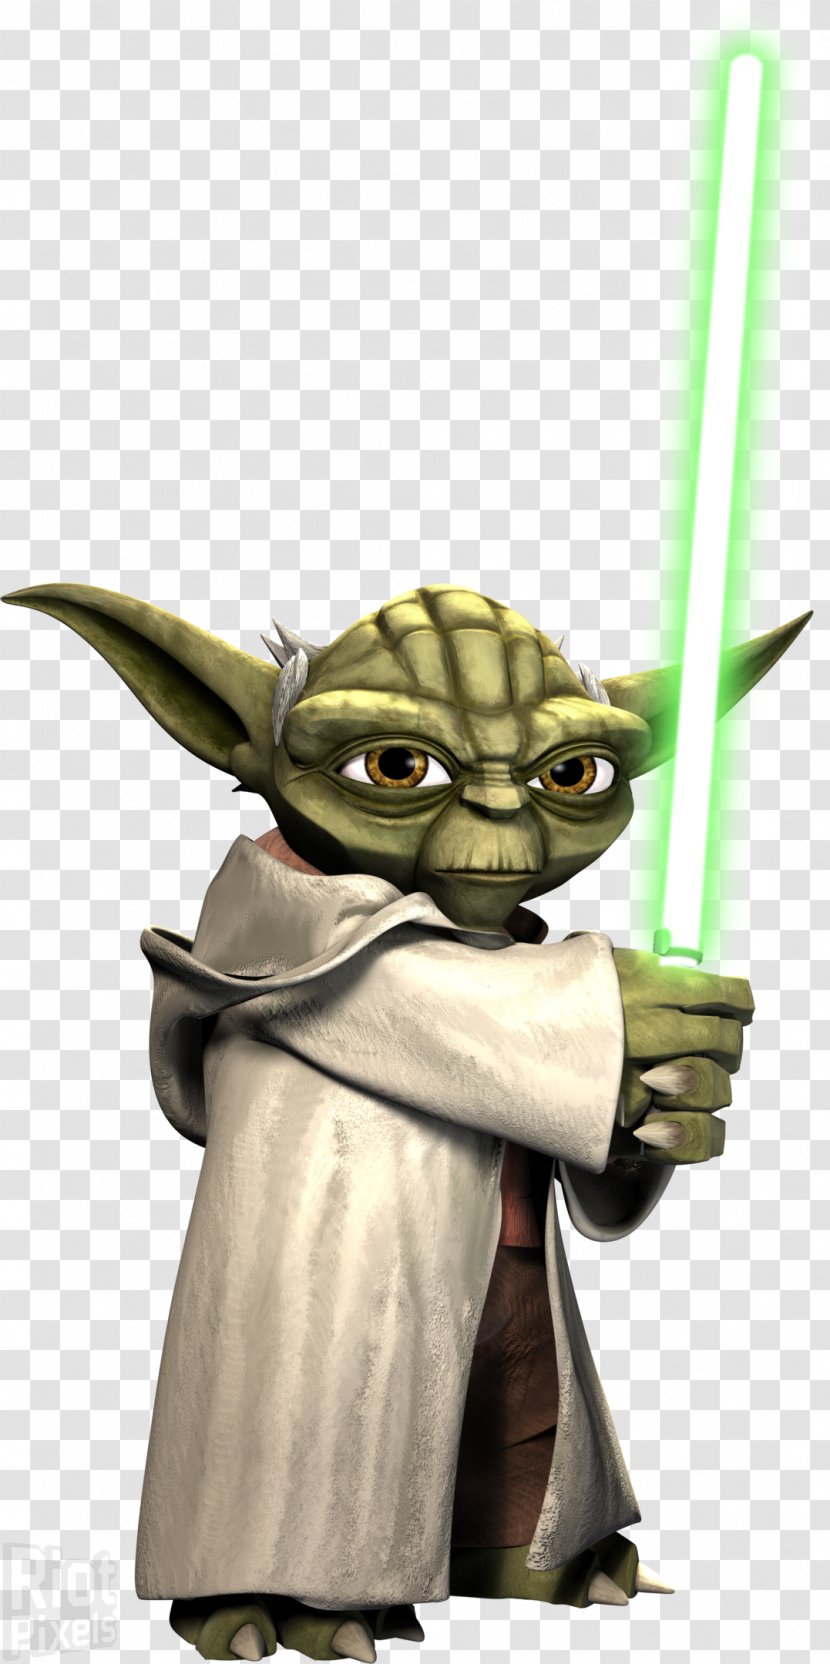 Yoda Star Wars: The Clone Wars Anakin Skywalker Darth Maul - Television - Vintage Collection Transparent PNG